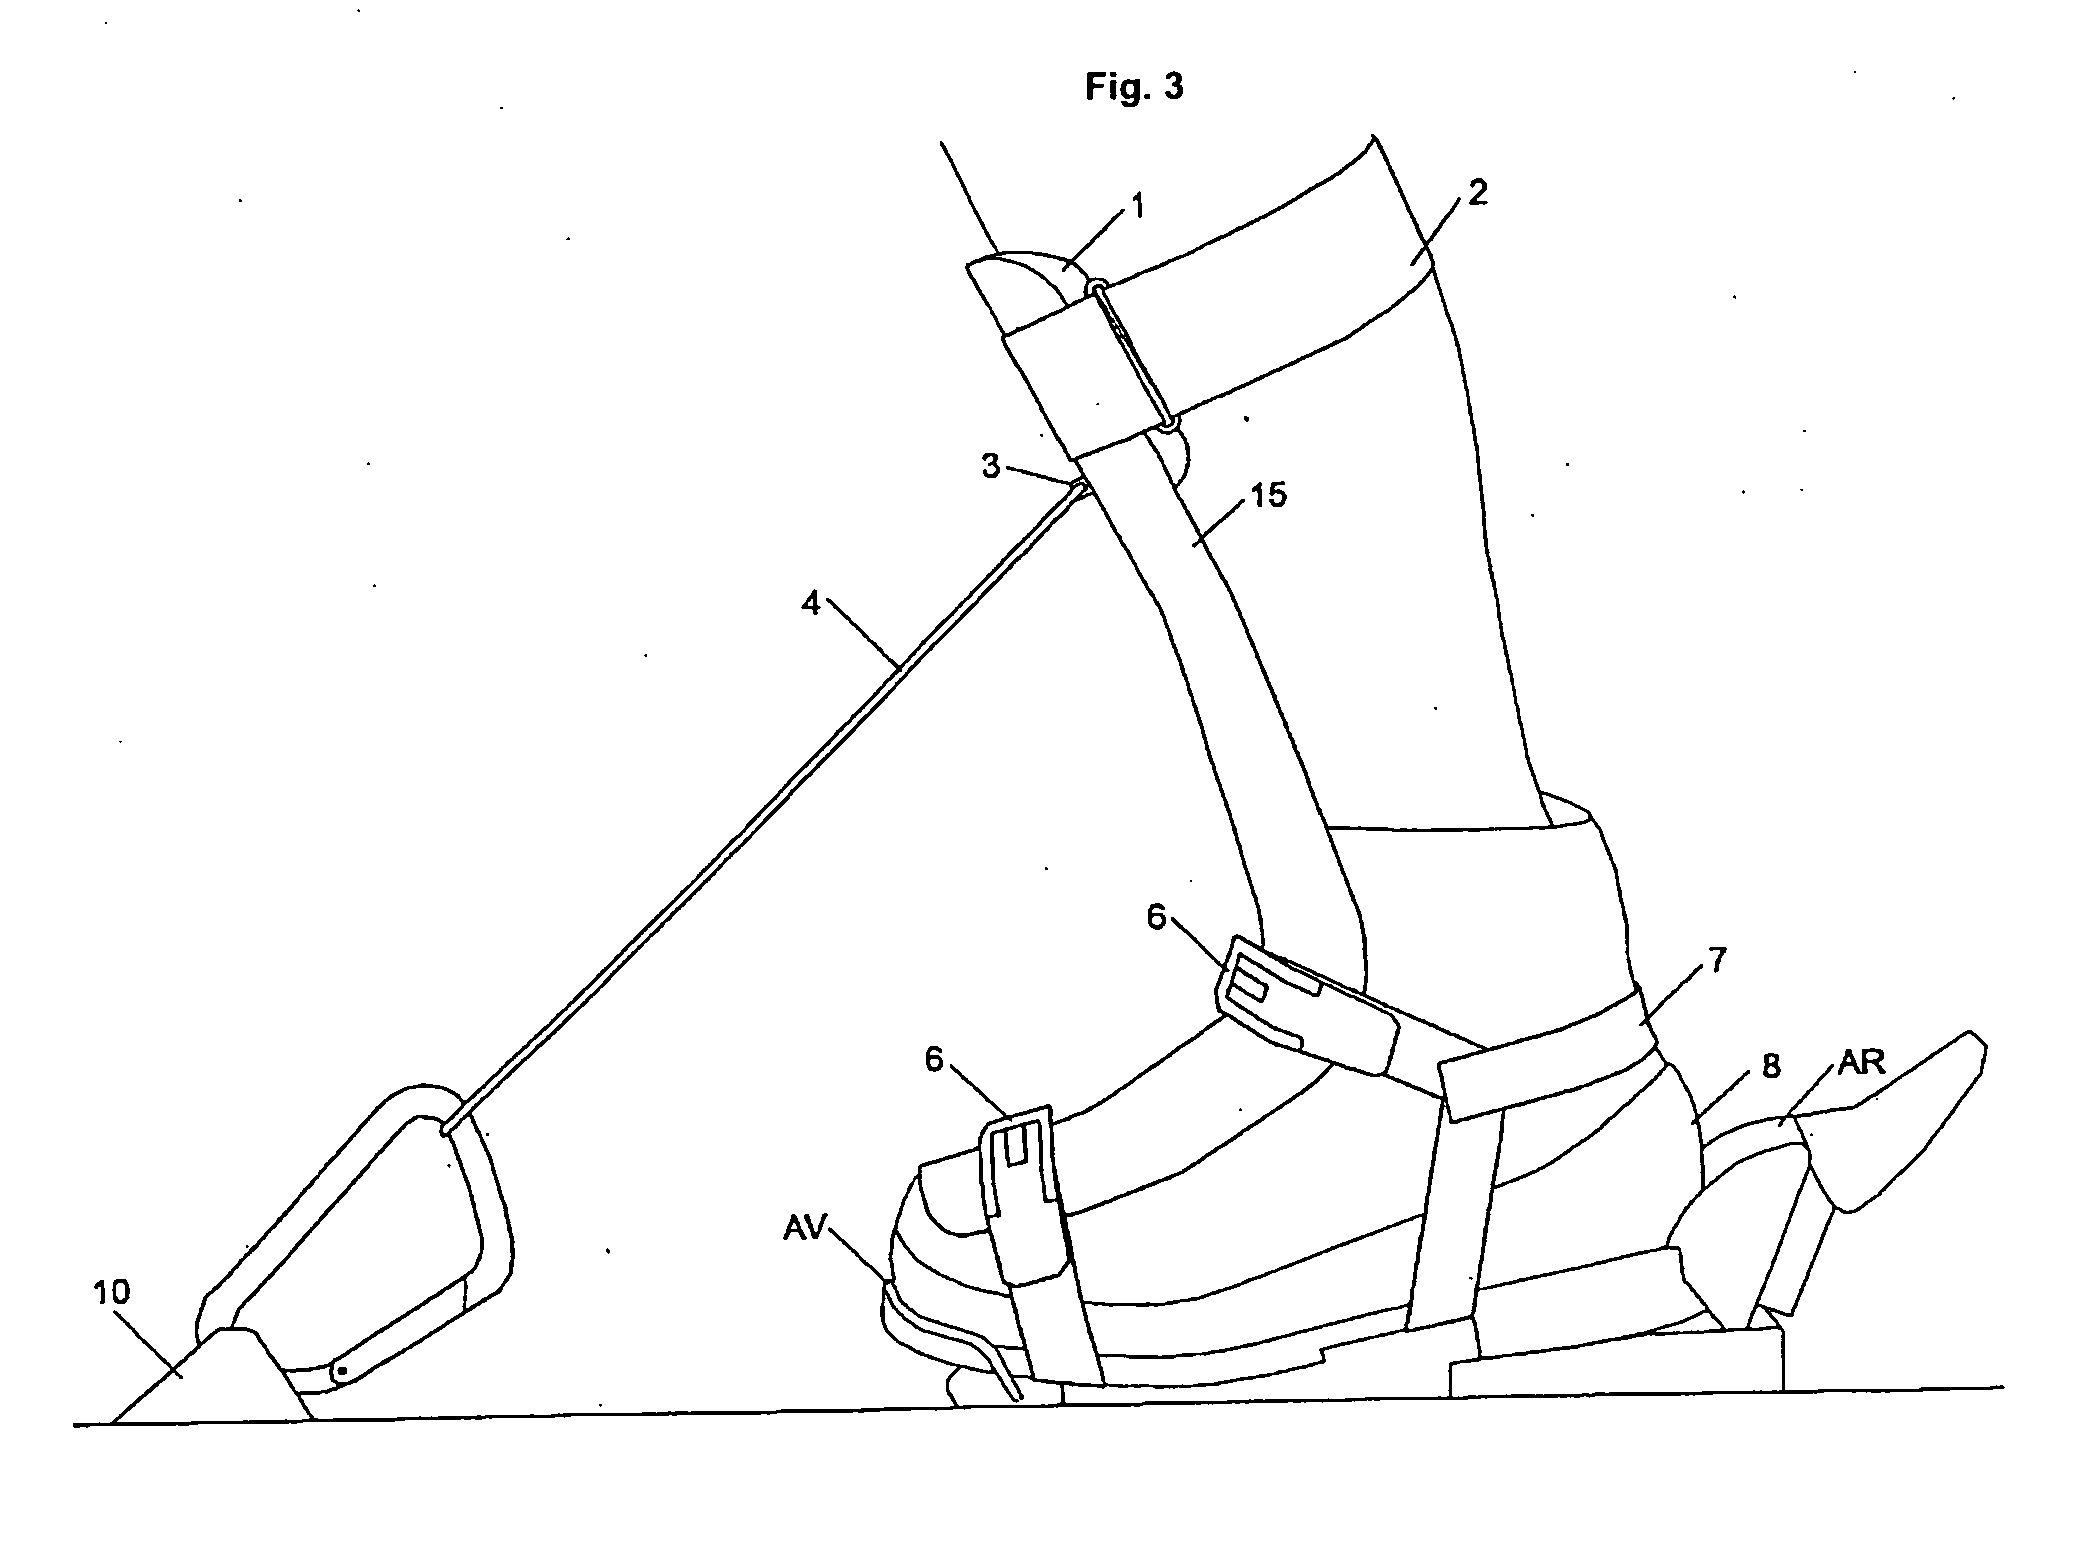 Tibia support device for skier